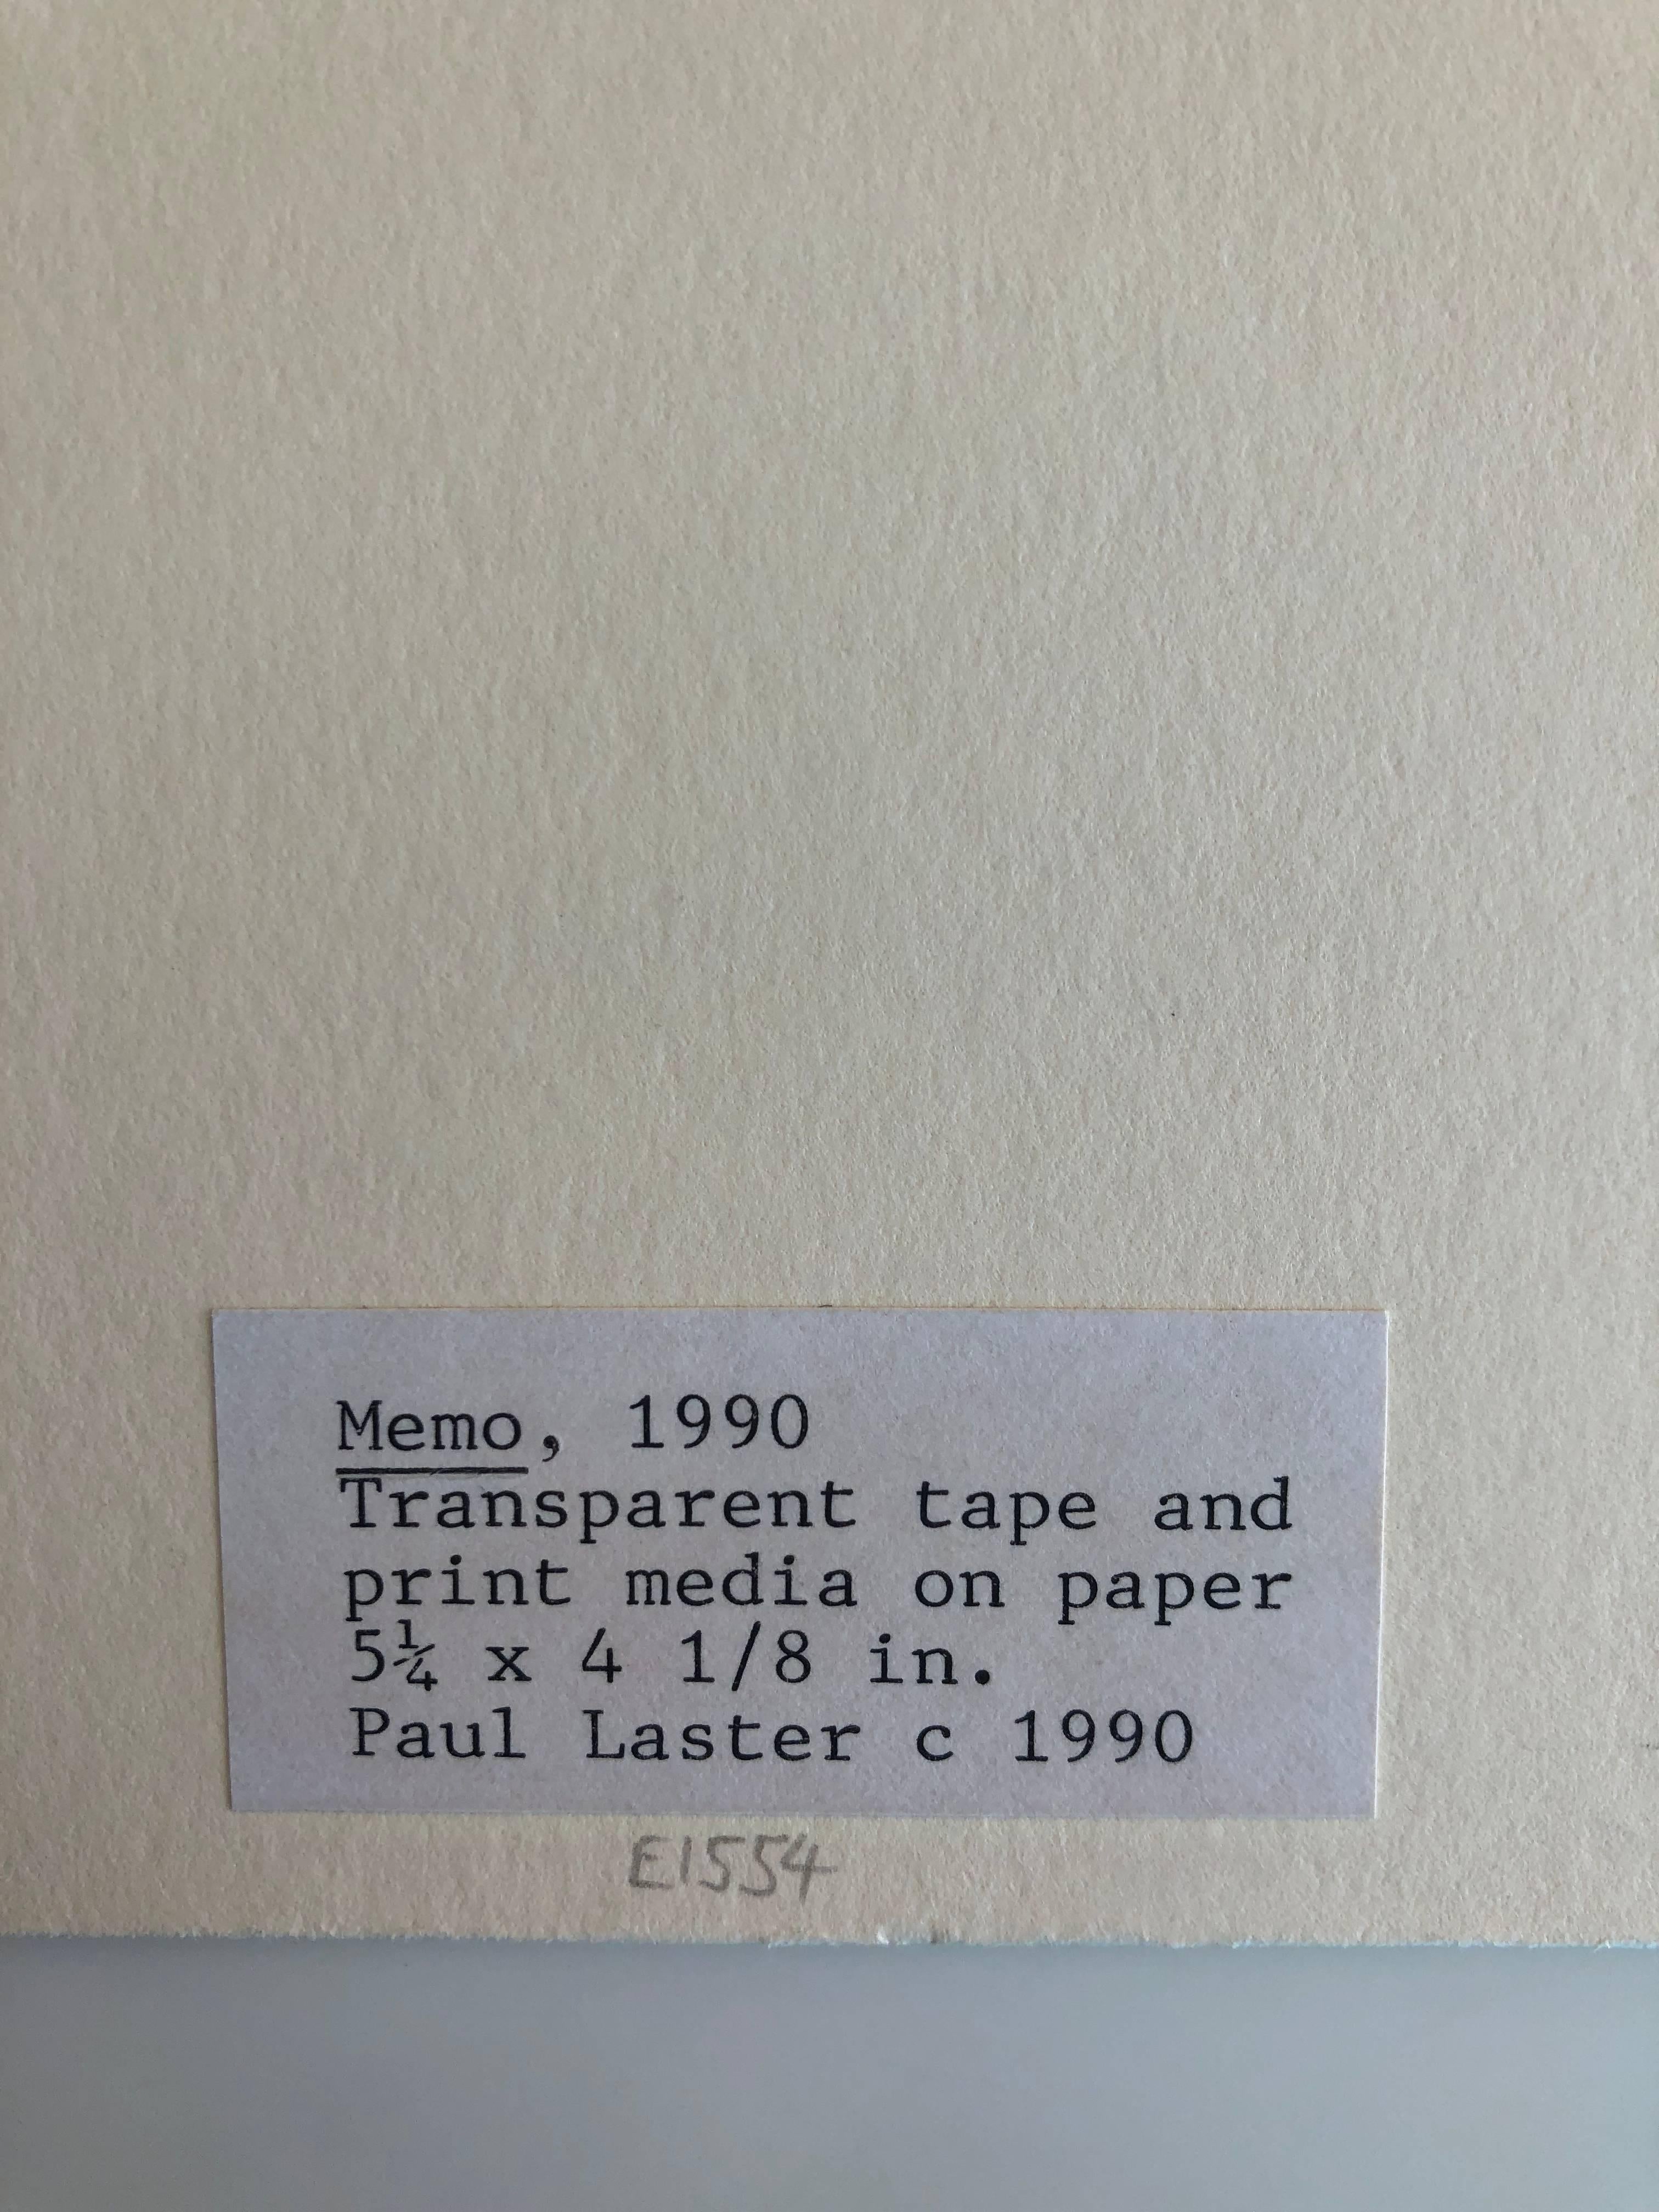 Memo, 1990 by Paul Laster
Transparent tape and print media on paper
Unframed
Image size: 5 in. H x 4 in. W.

Paul Laster is a writer, editor, independent curator, artist, and lecturer. He is a New York desk editor at Art Asia Pacific and a